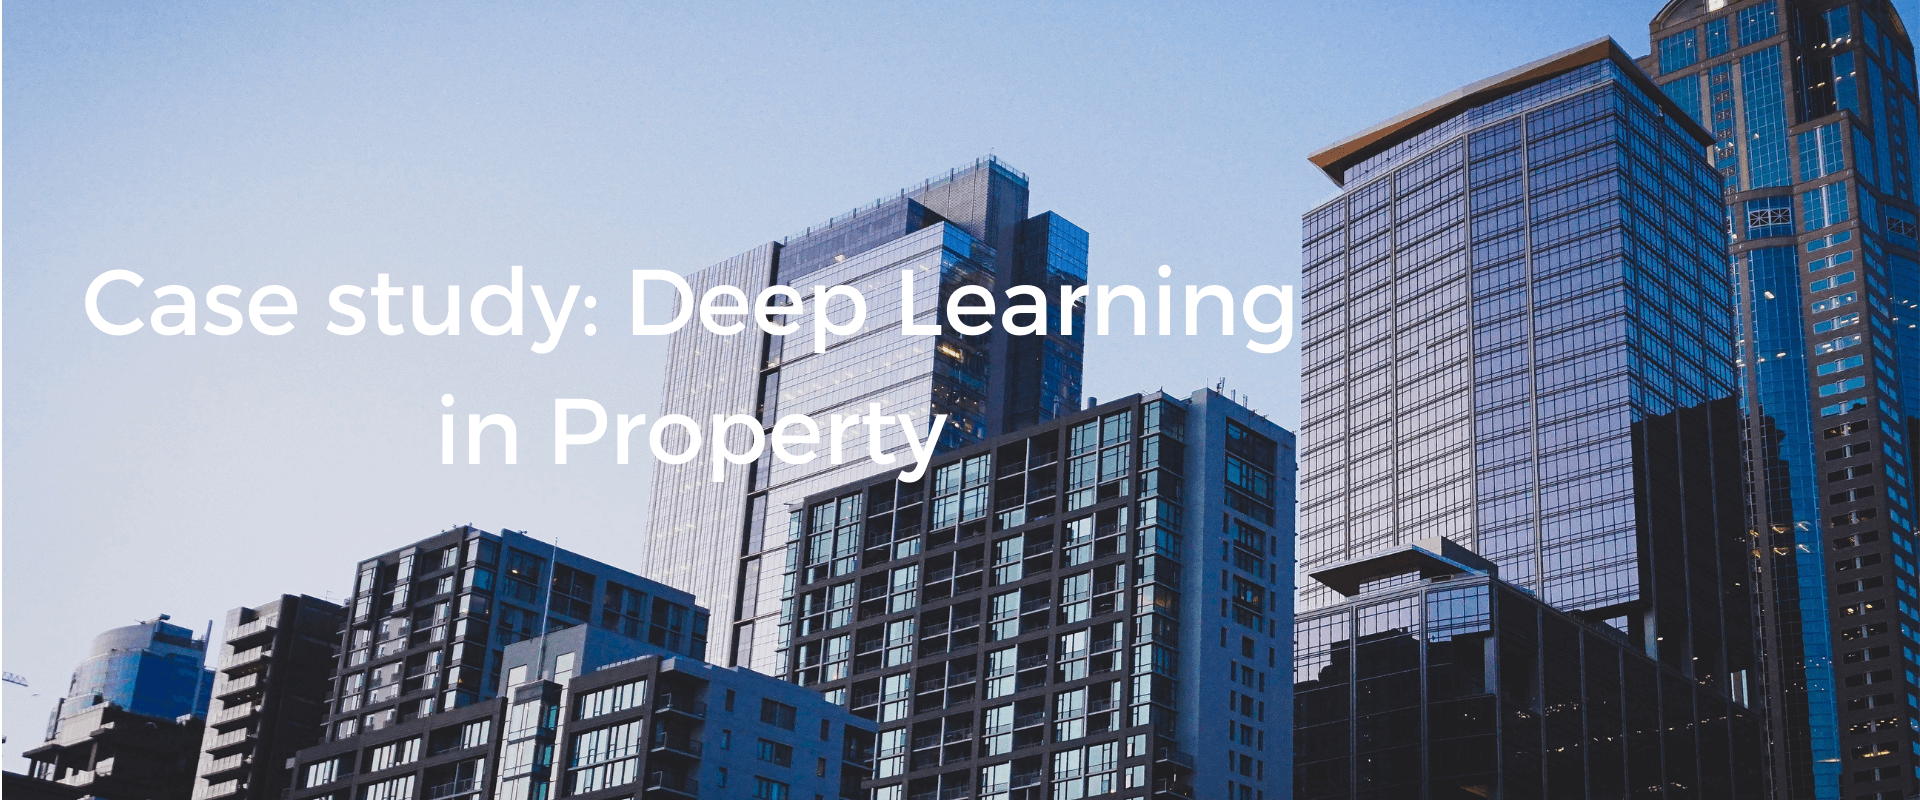 Deep-learning-in-property